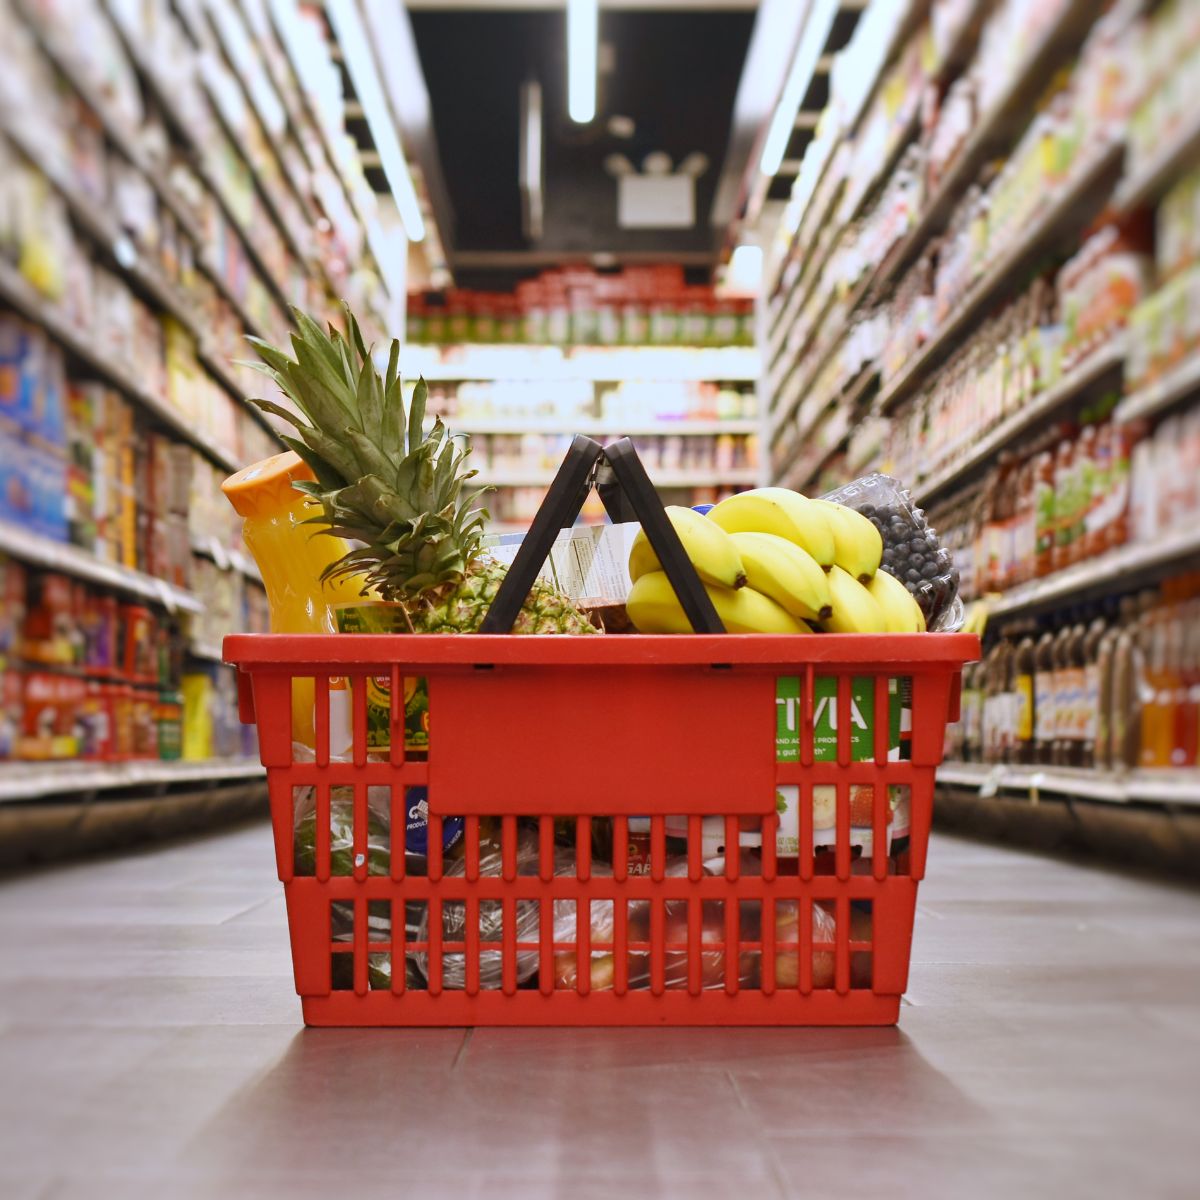 20 Practical Ways To Save On Groceries